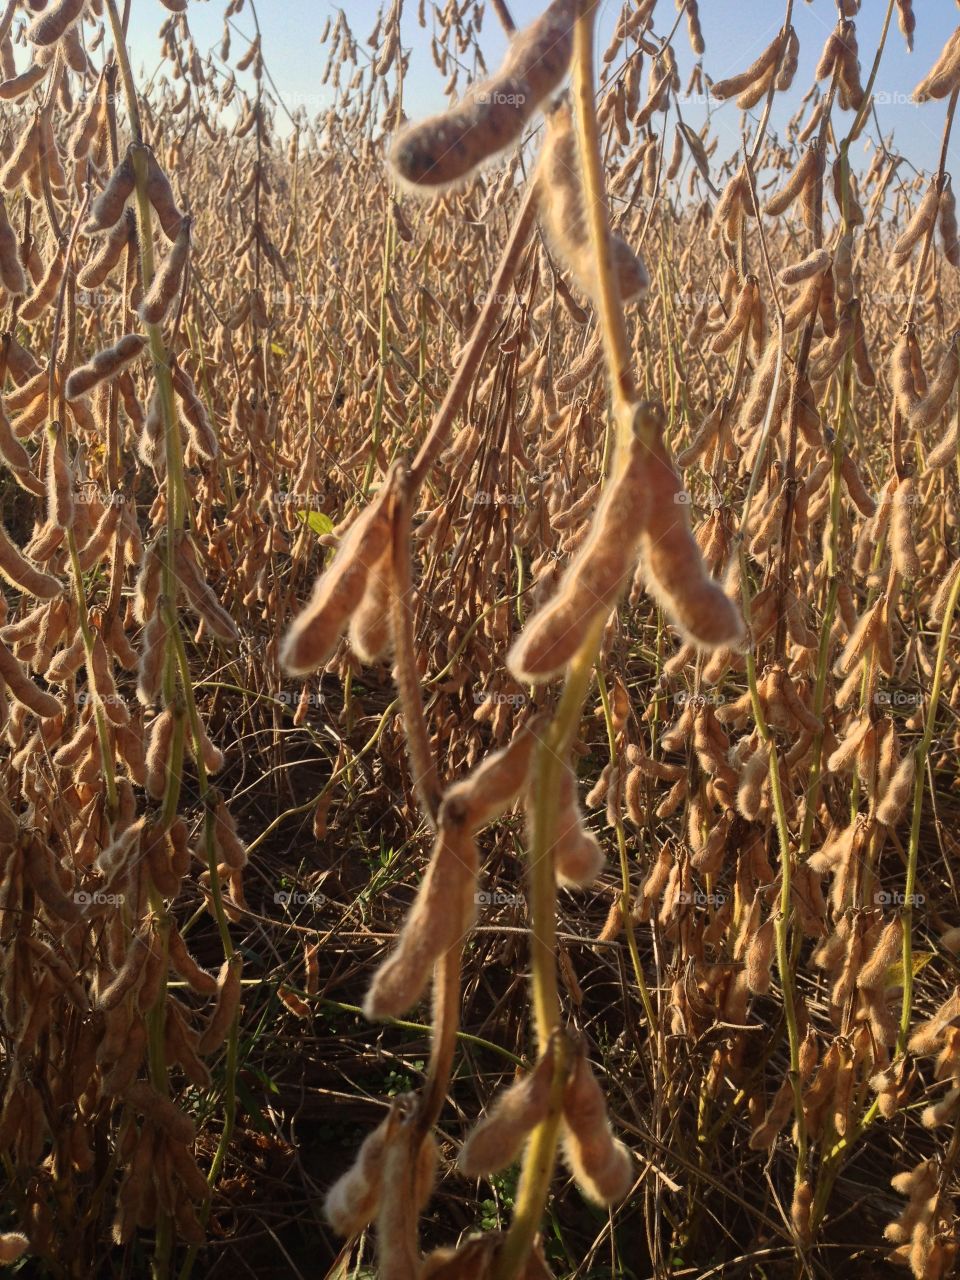 Soybeans ready for harvest. 